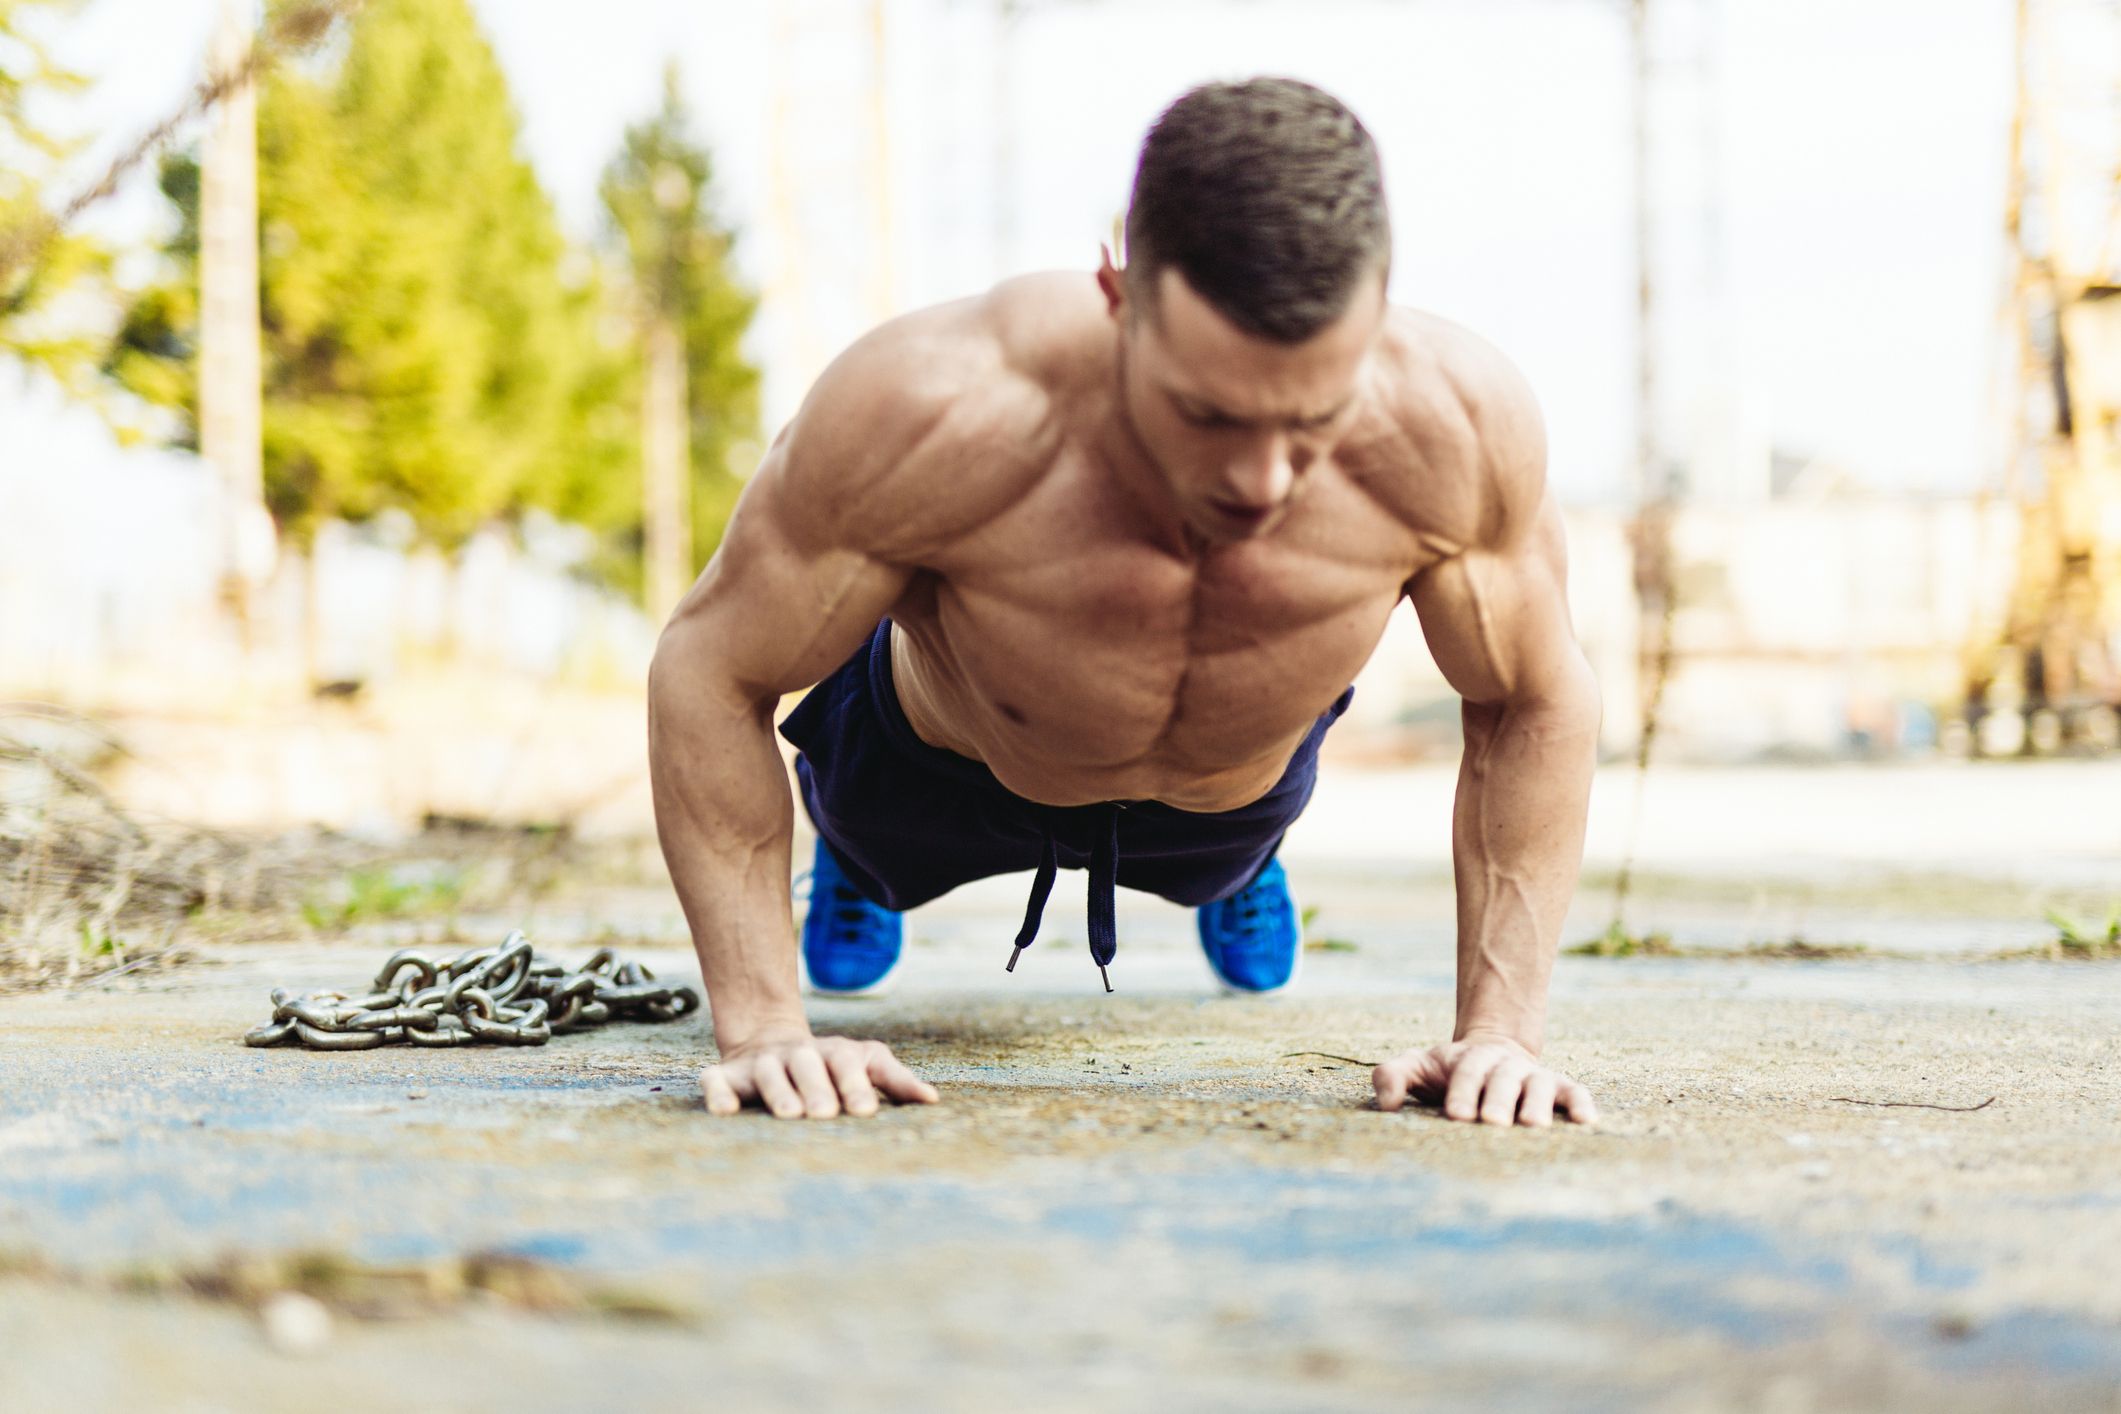 I did 20 push-ups a day for 14 days — here's what happened to my upper body